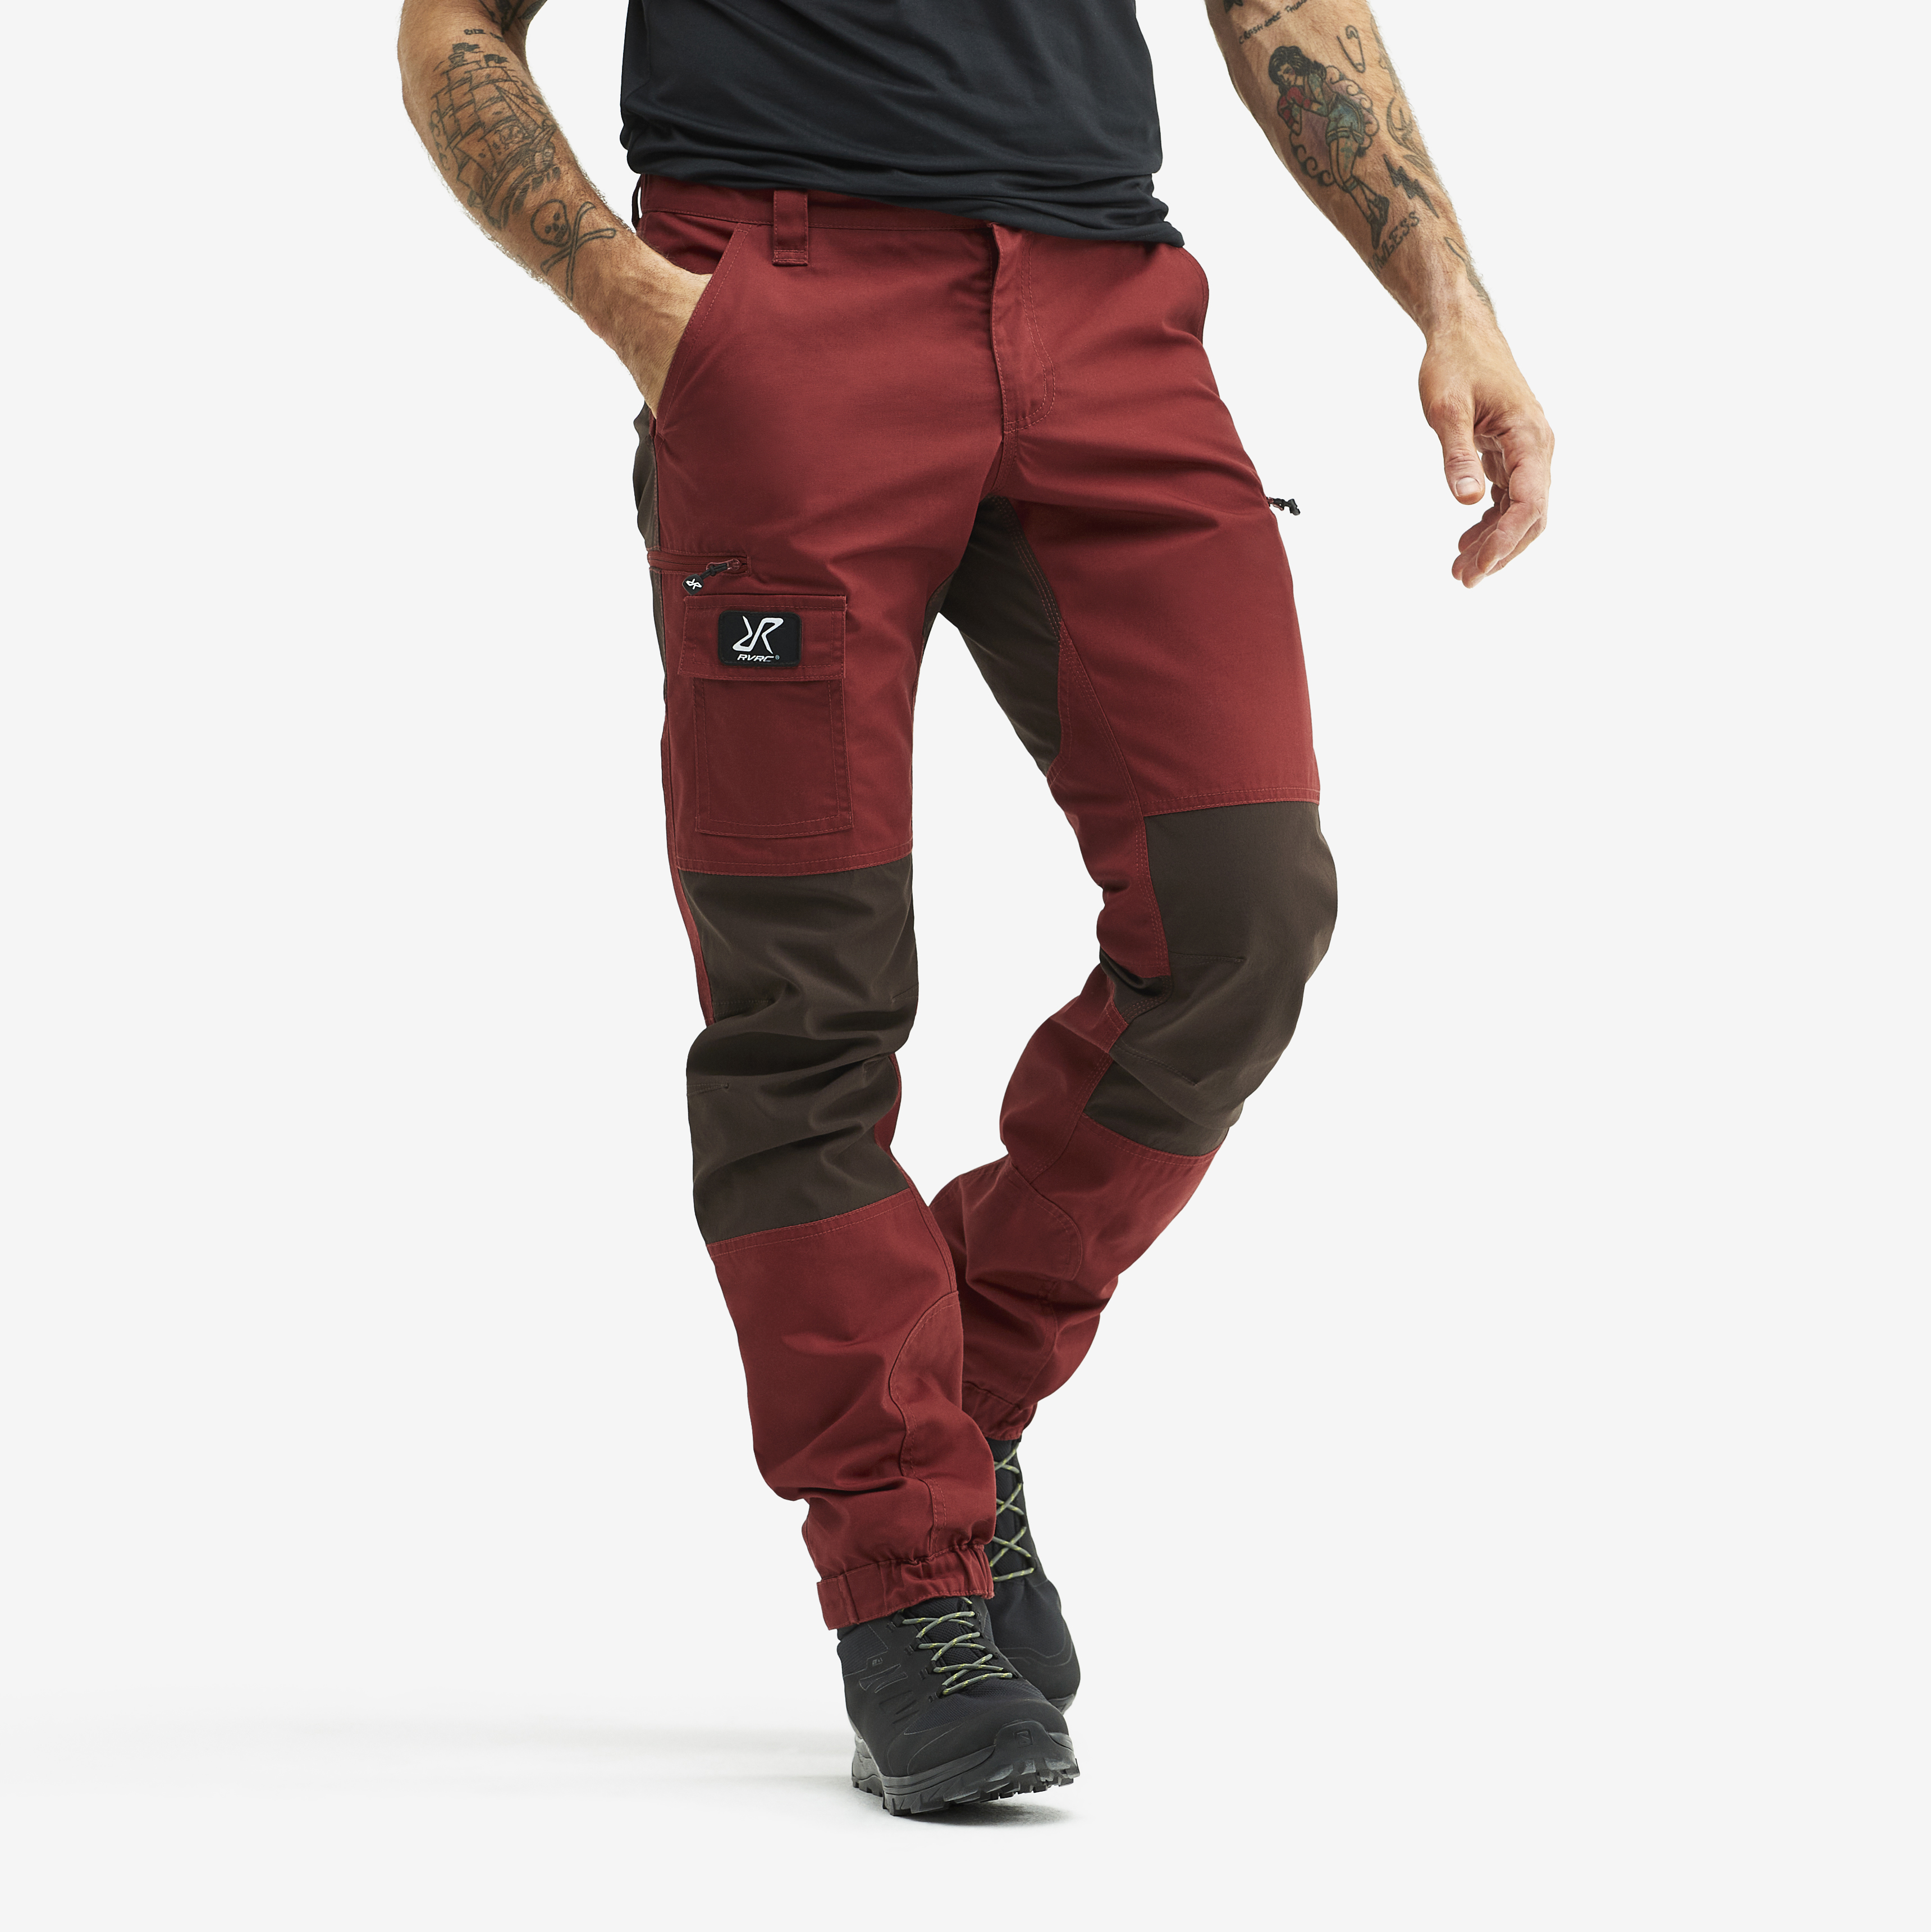 Nordwand outdoor pants for men in brown